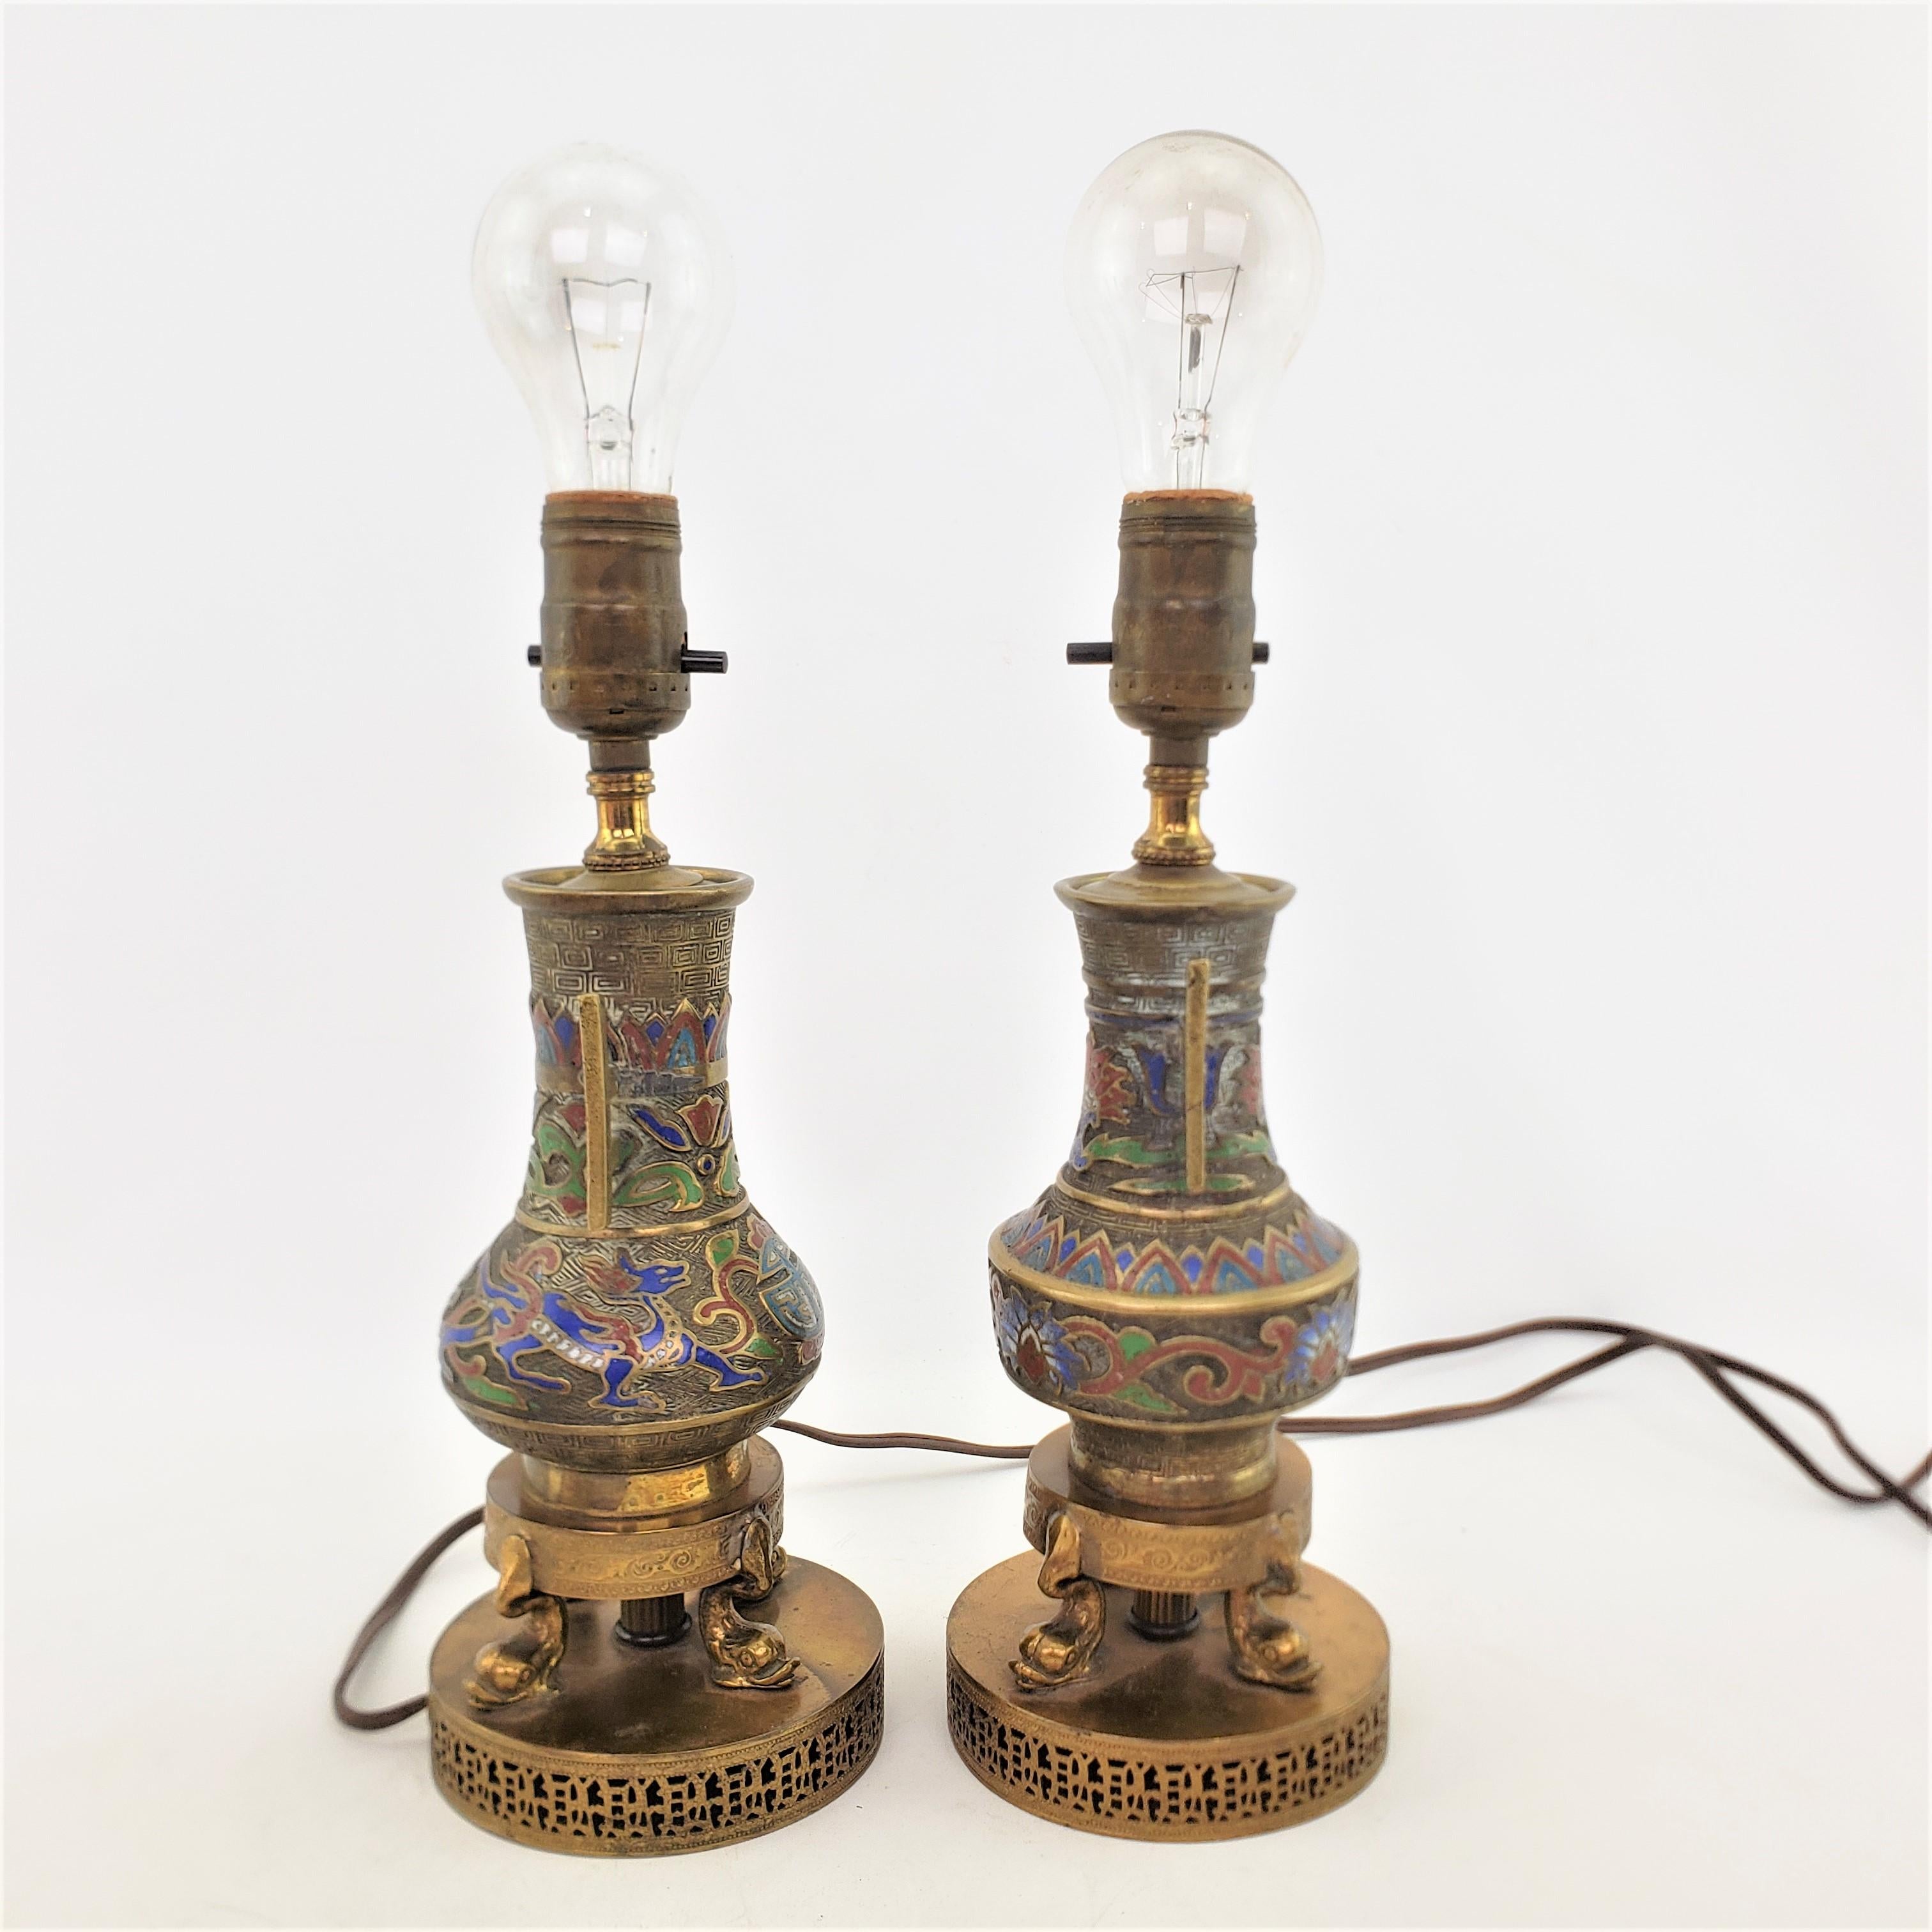 Anglo-Japanese Pair of Antique Japanese Cloisonne Accent or Boudoir Table Lamps For Sale